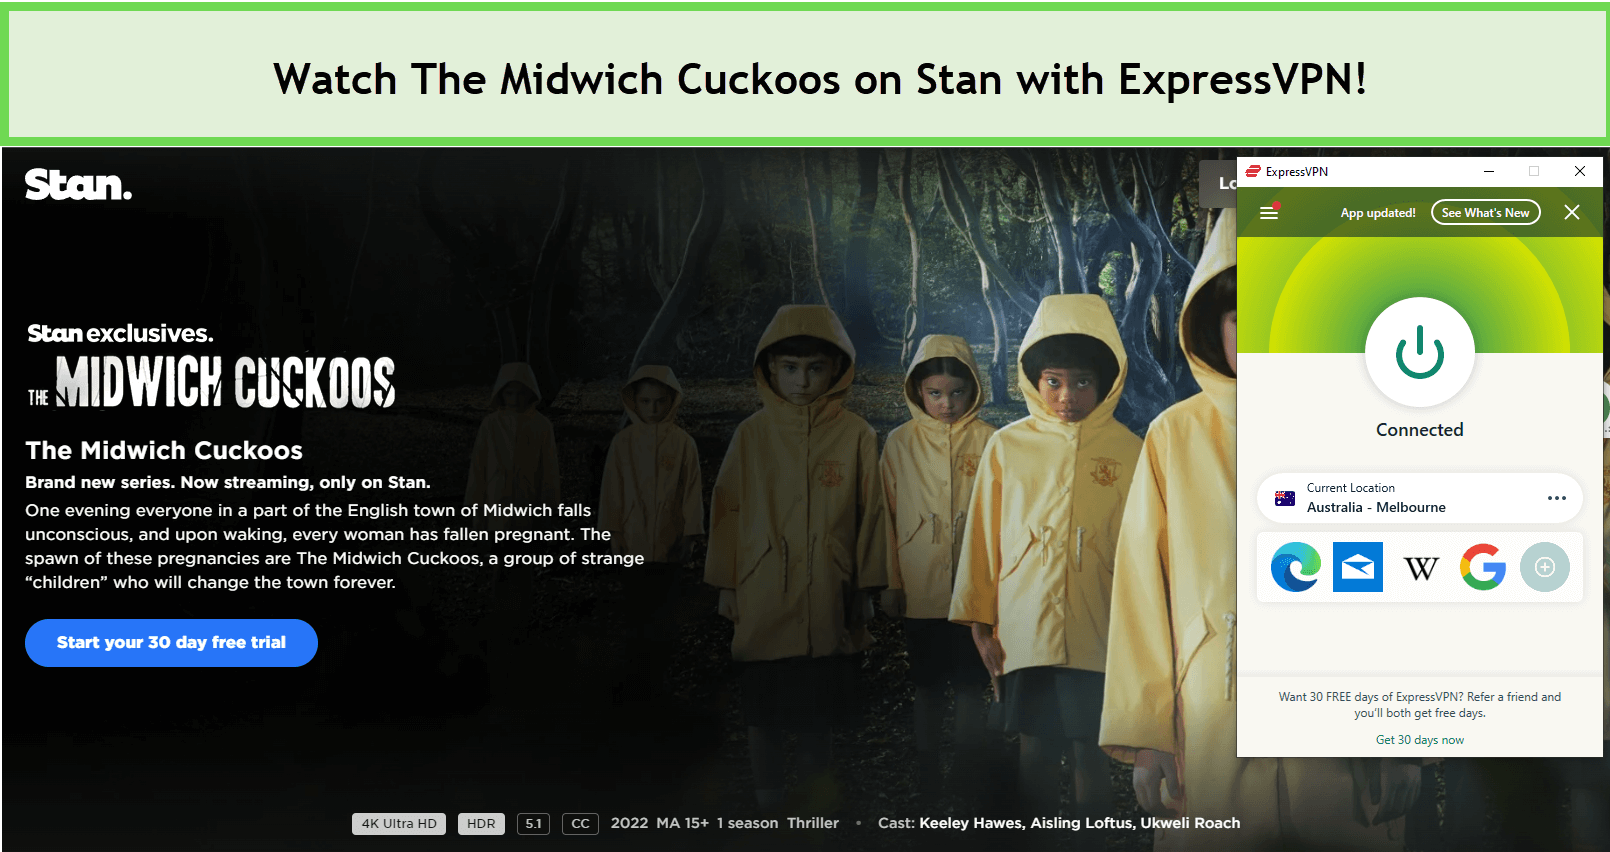 Watch-The-Midwich-Cuckoos-in-South Korea-on-Stan-with-ExpressVPN